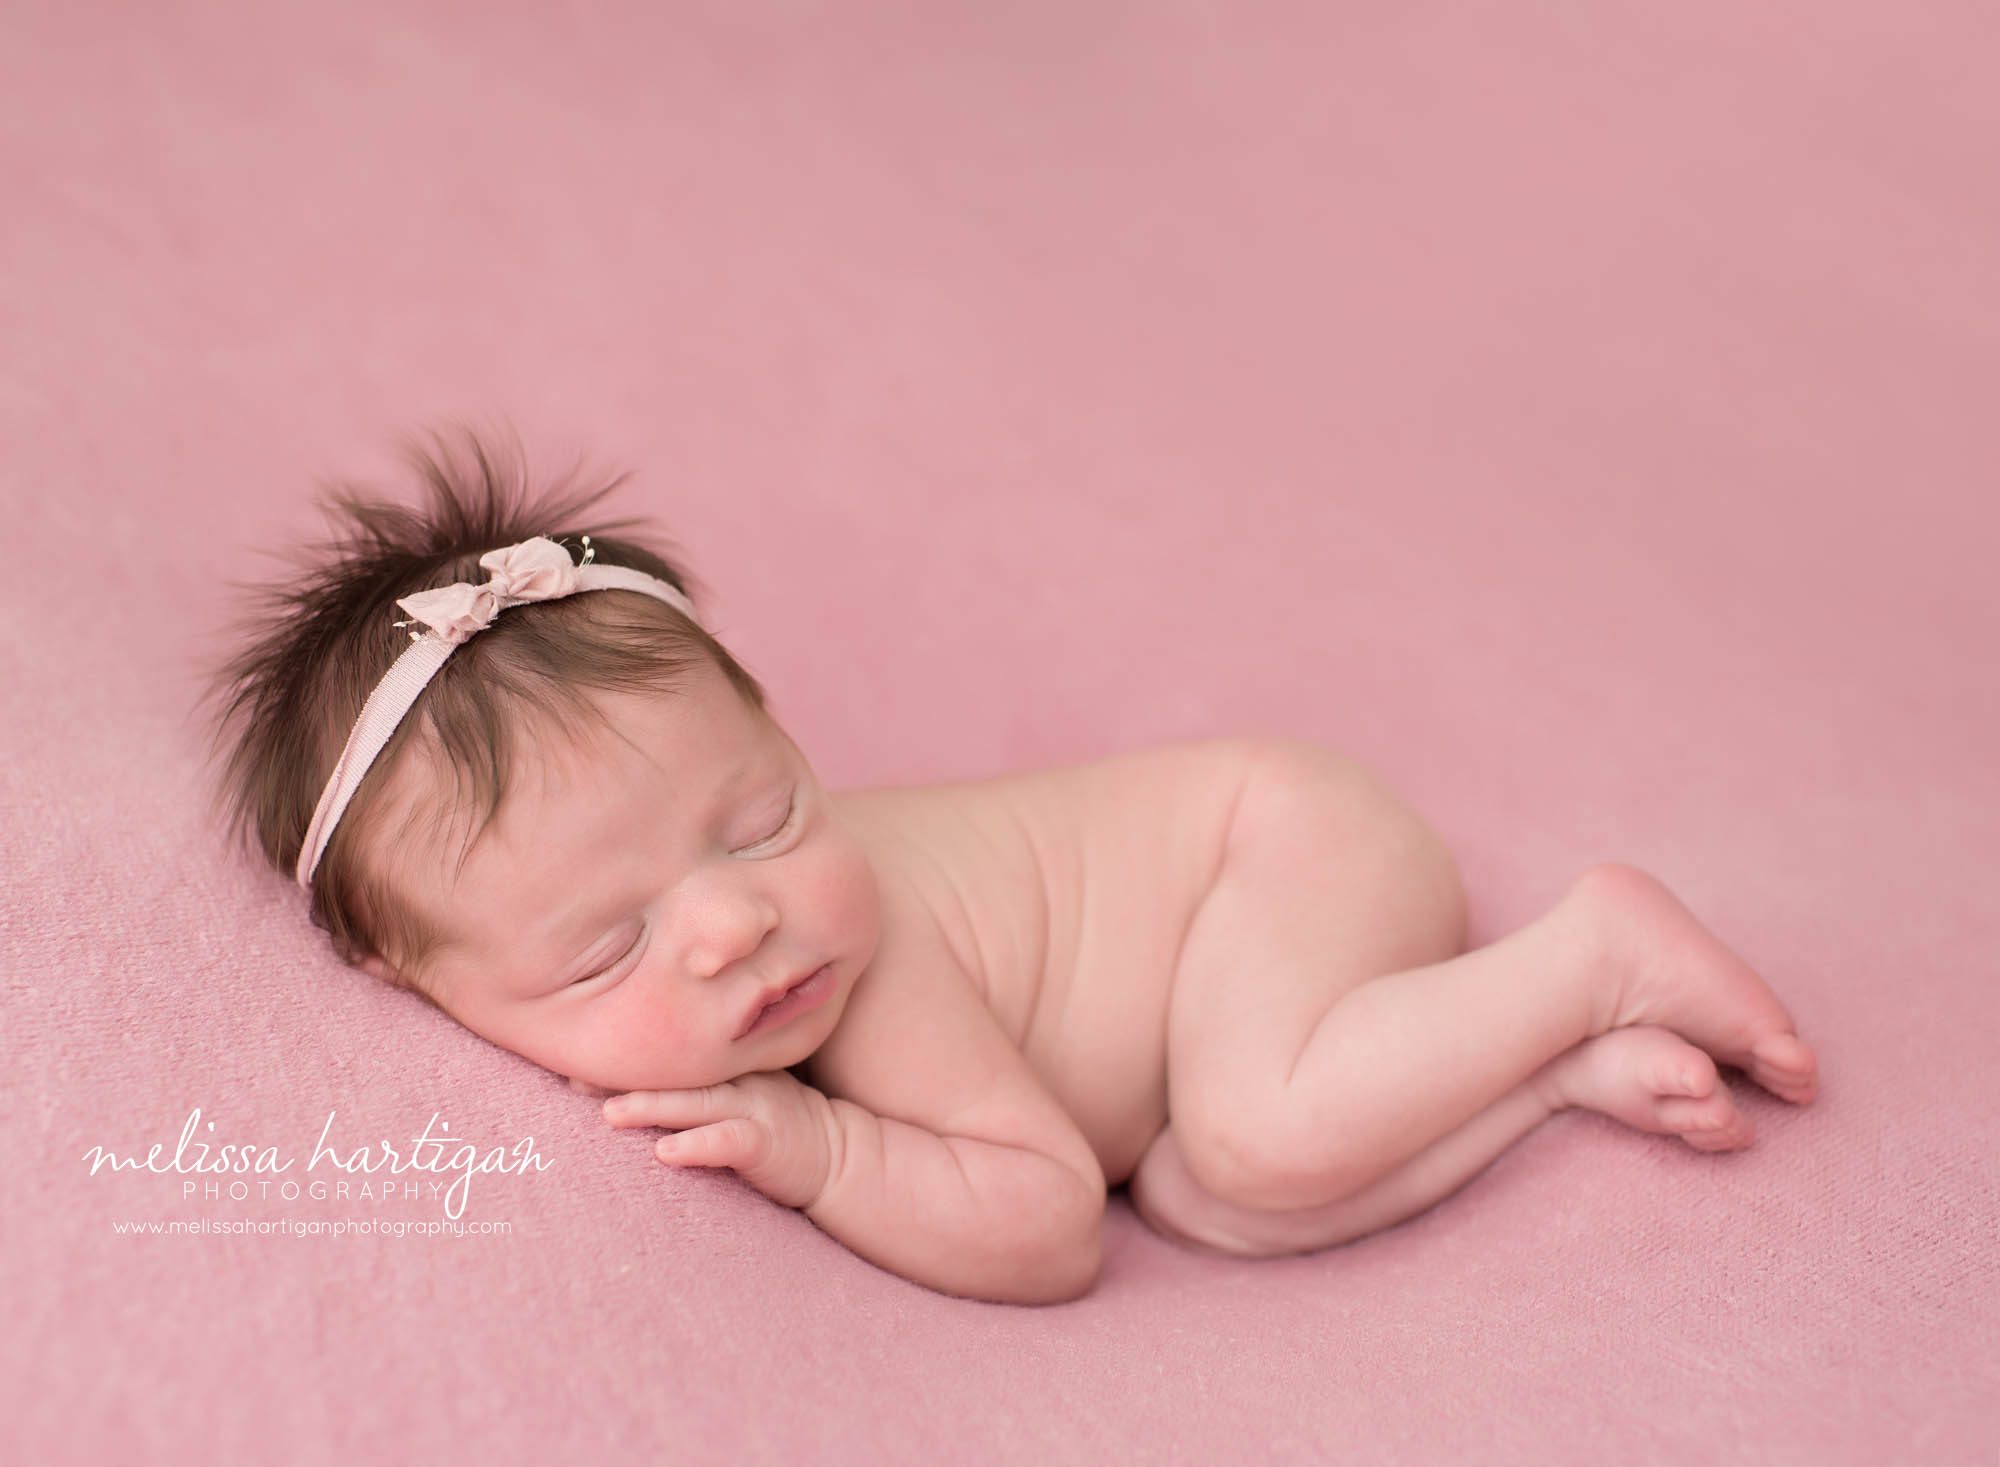 newborn baby girl posed on side on pink backdrop wearing pink bow headband CT maternity newborn photography